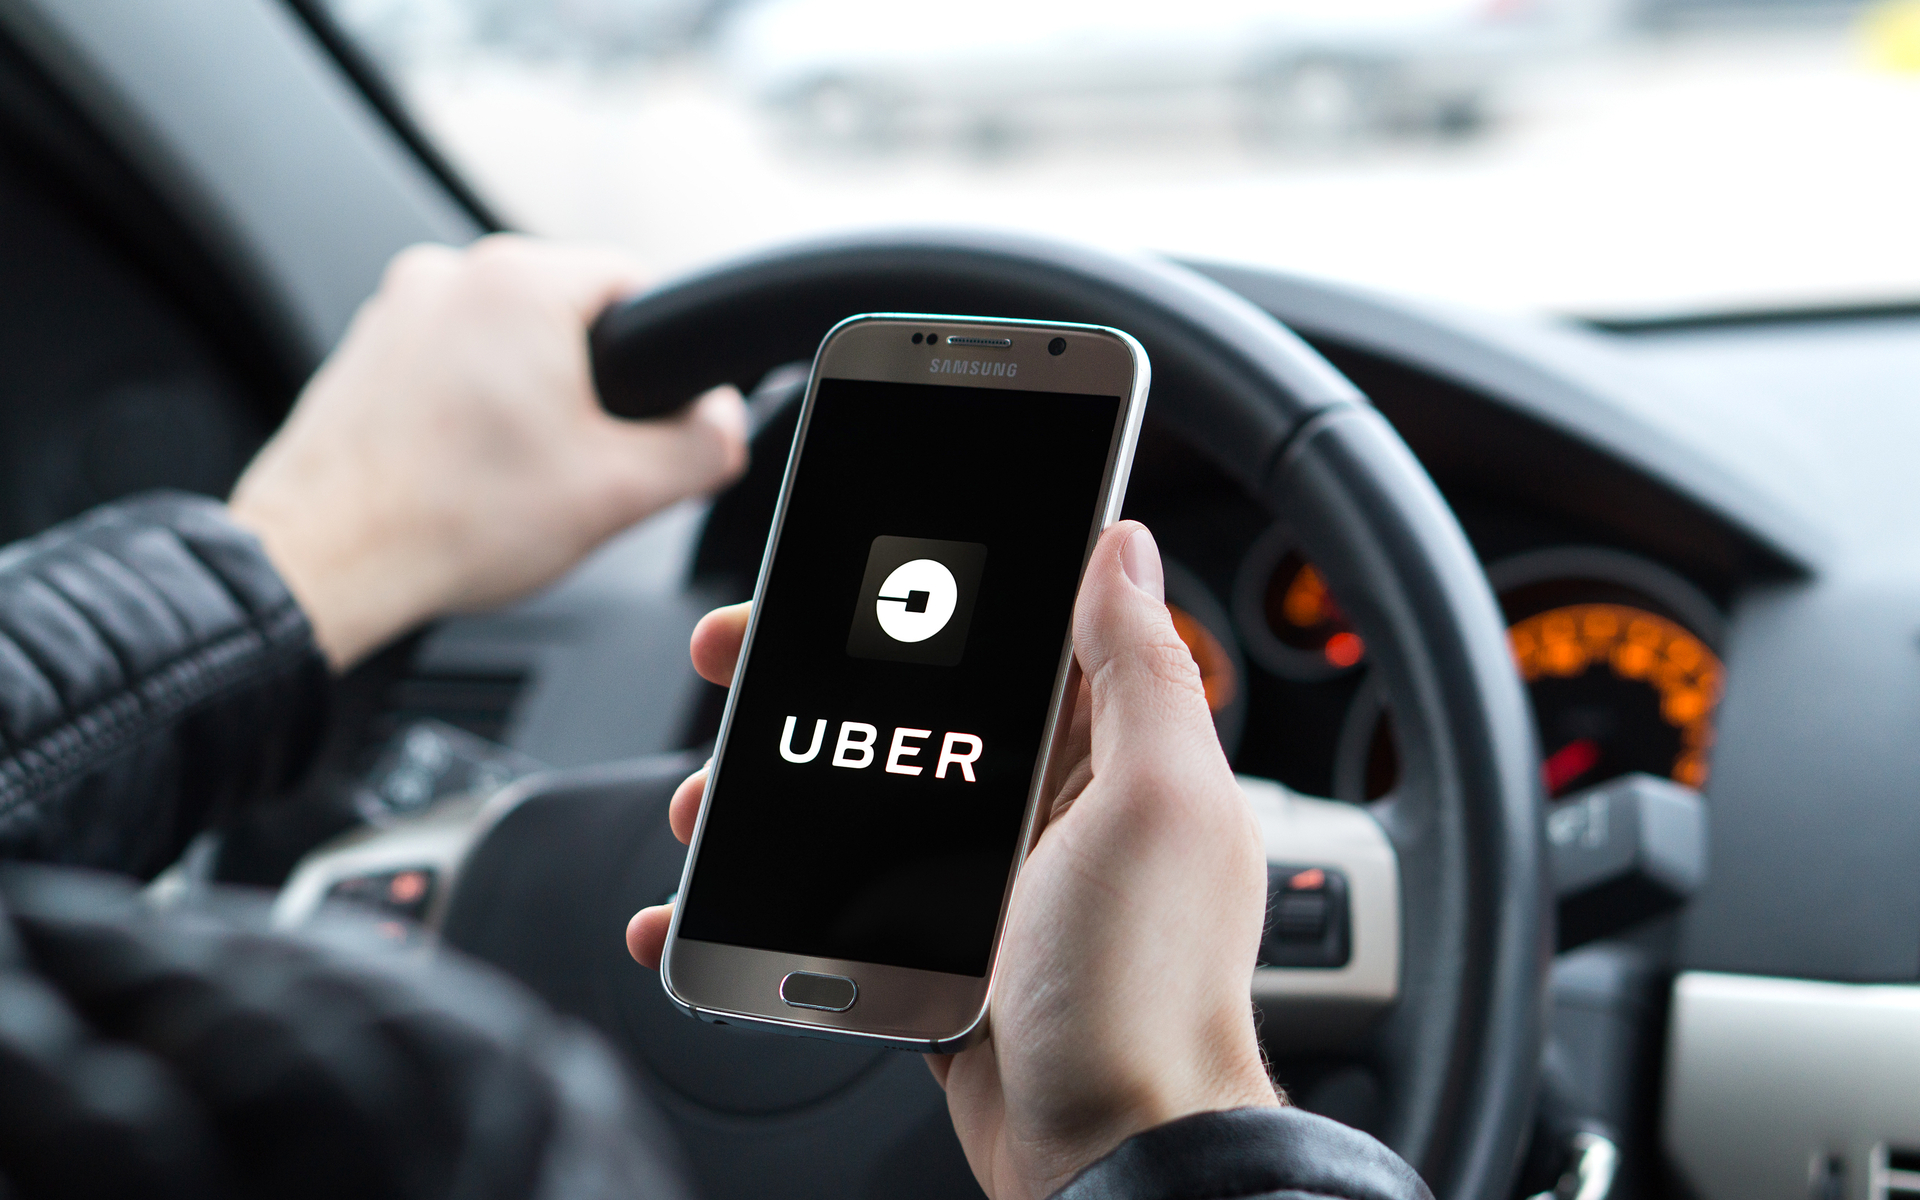 An Uber Crypto Future Could Be Closer Than You Think